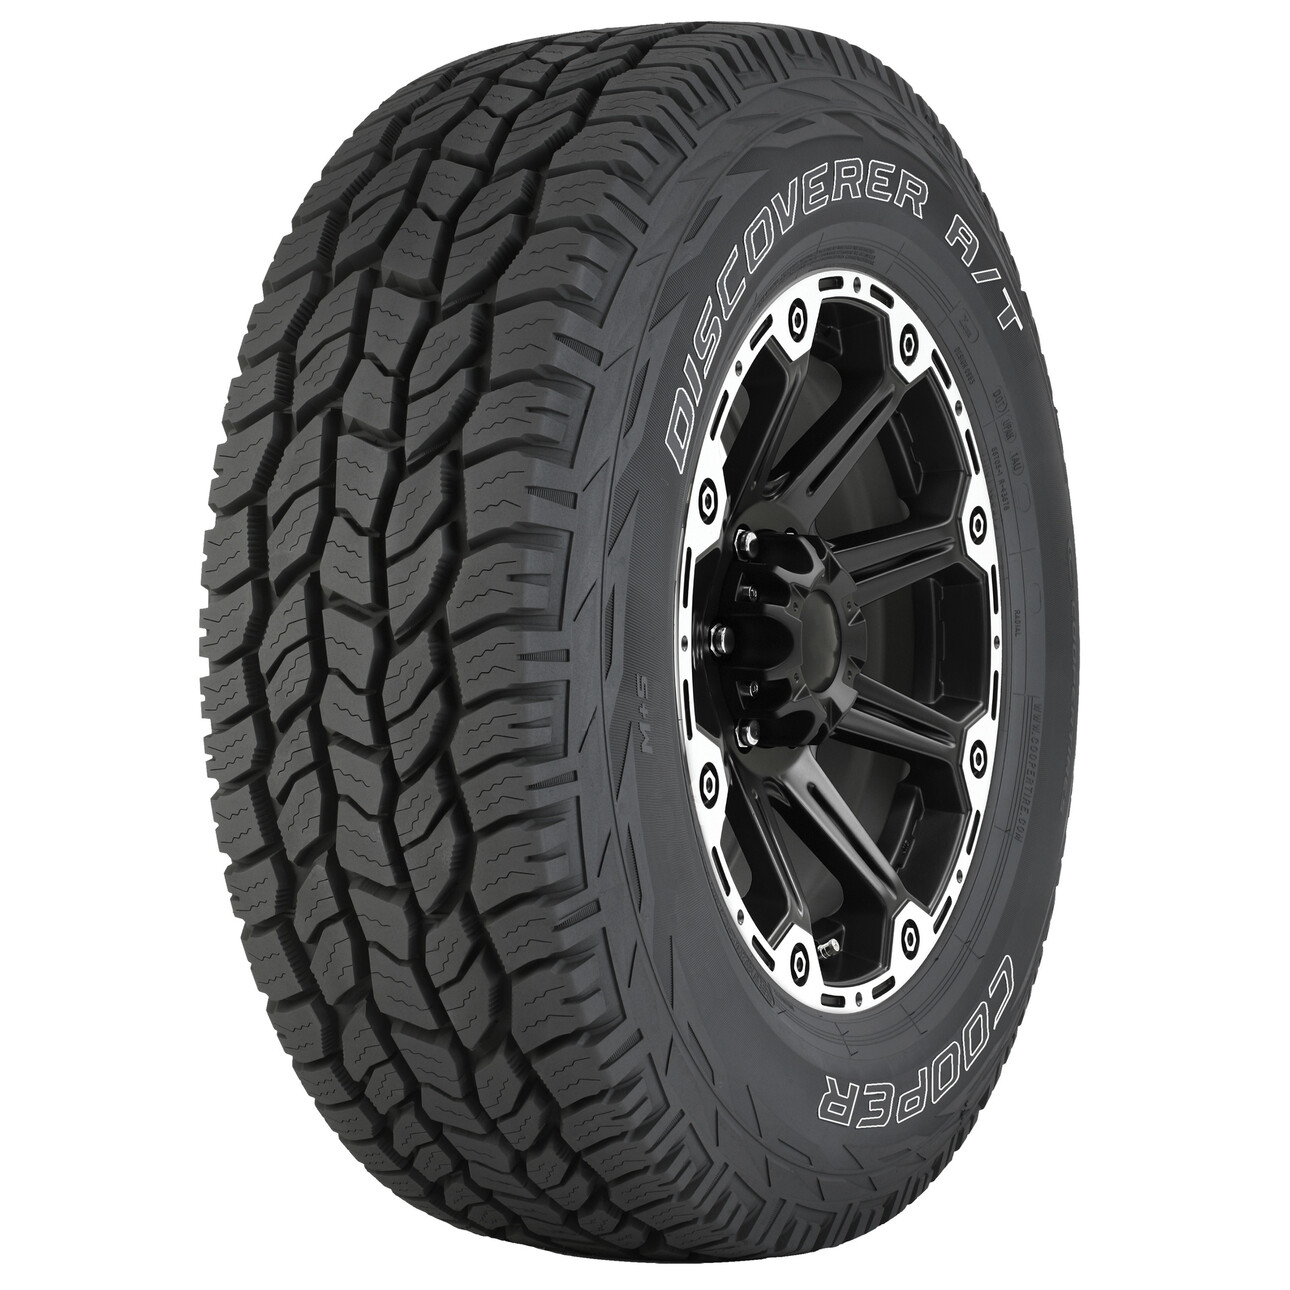 Cooper Discoverer A/T All-Season 245/65R17 107T Tire Fits: 2004 Jeep Grand Cherokee Overland, 2019 Jeep Cherokee Trailhawk Elite - image 1 of 10